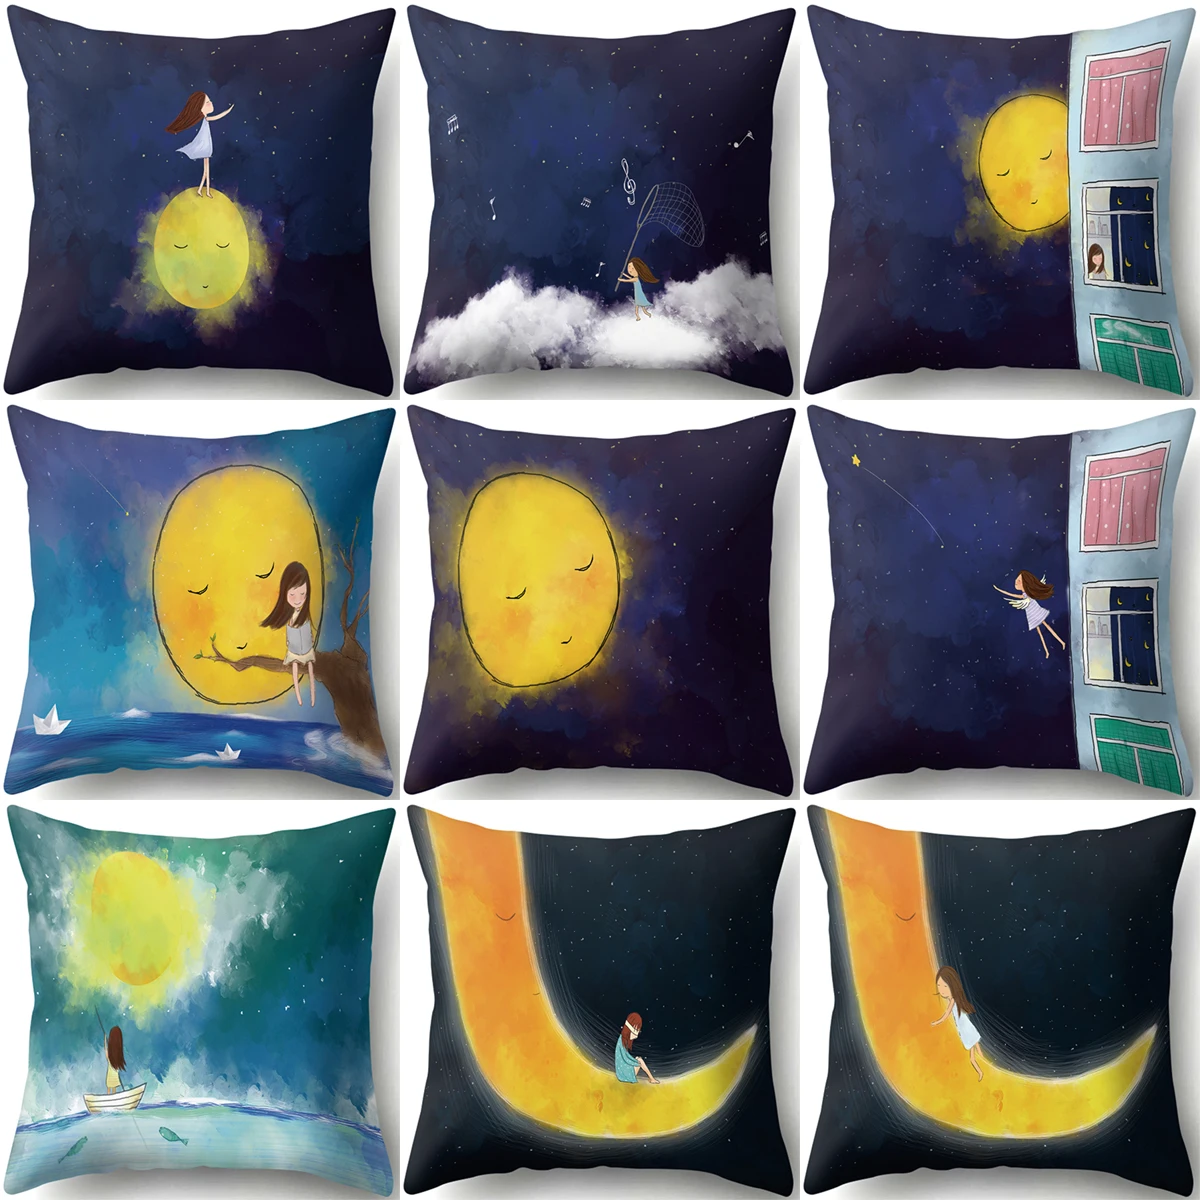 

ZHENHE Hand Painted Girl and Moon Pillow Case Home Decoration Cushion Cover Bedroom Sofa Decor Pillow Cover 18x18 Inch